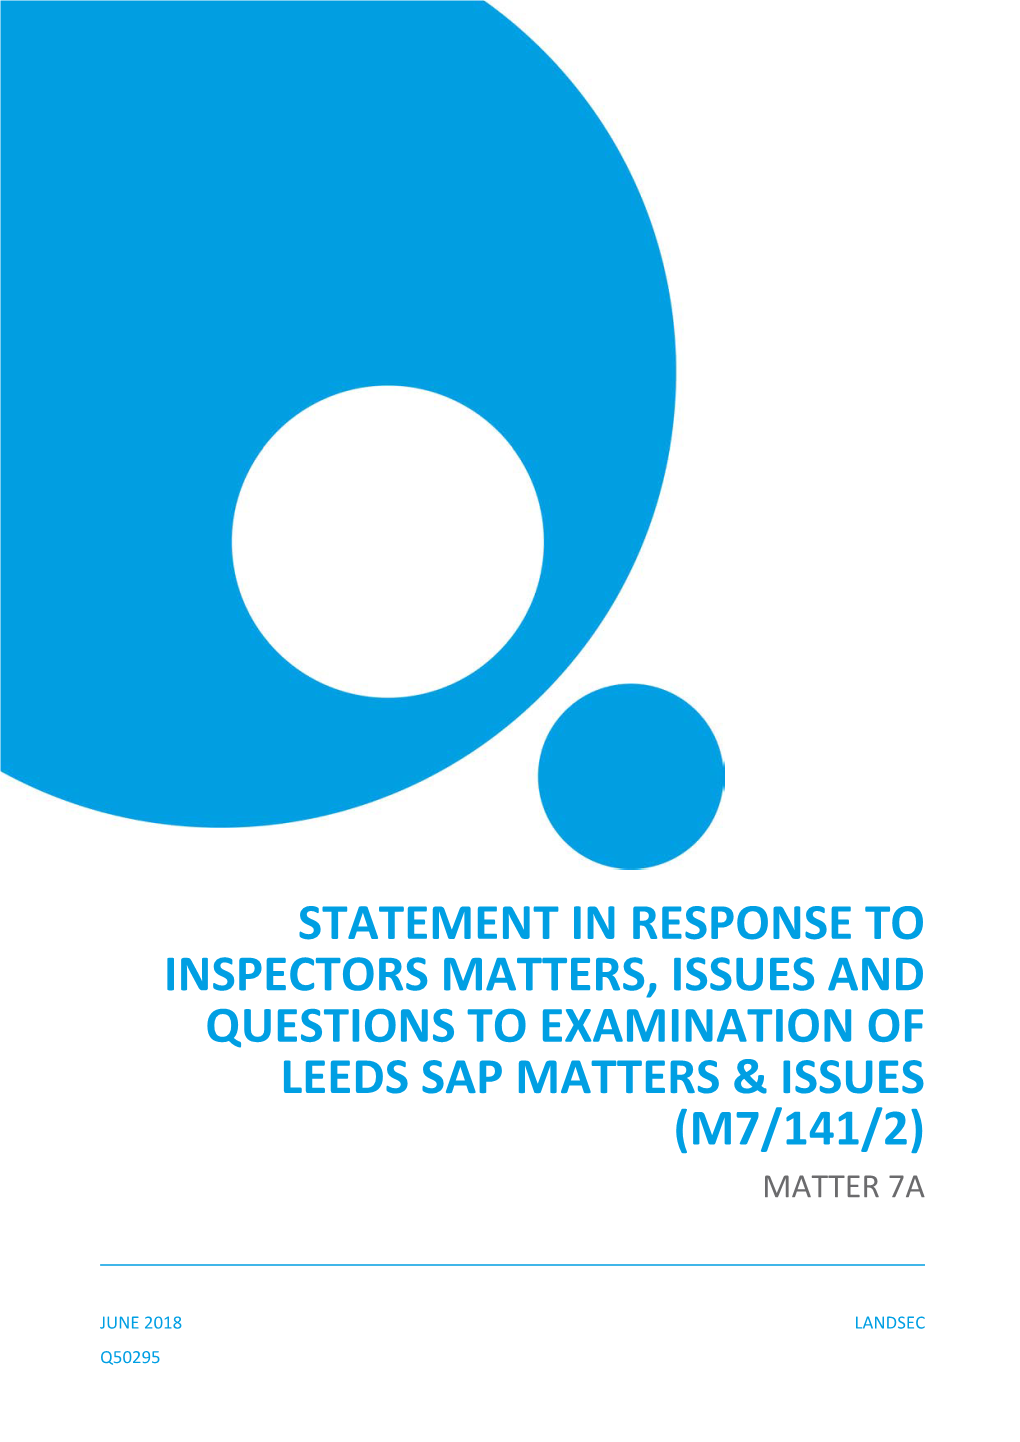 Statement in Response to Inspectors Matters, Issues and Questions to Examination of Leeds Sap Matters & Issues (M7/141/2) Matter 7A